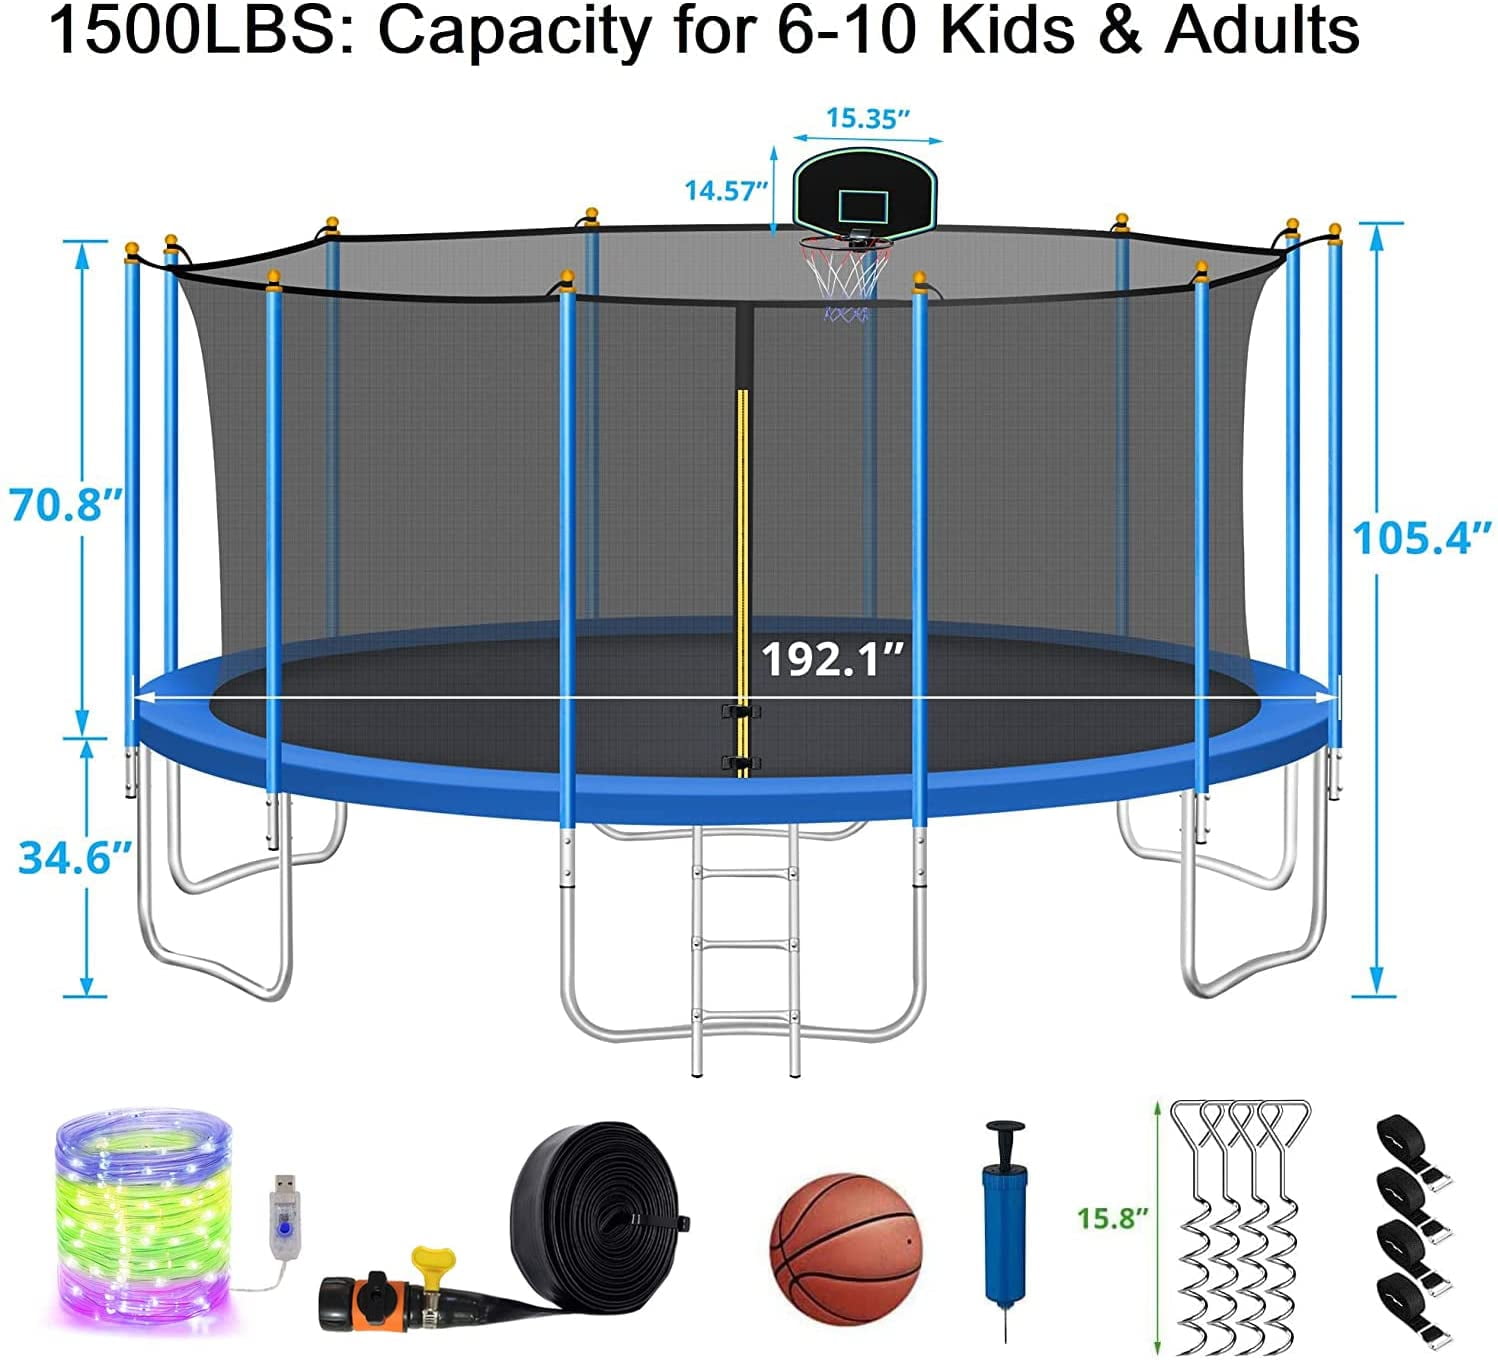 Duty Outdoor Tranpolíne for Family Backyard with 4 Sets Wind Stakes Enclosure Net【ASTM CPC CPSIA Approved】 Heavy SKYUP 1500LBS 16FT Tranpoline for 9-10 Kid/Adults with Basketball Hoop Ladder 